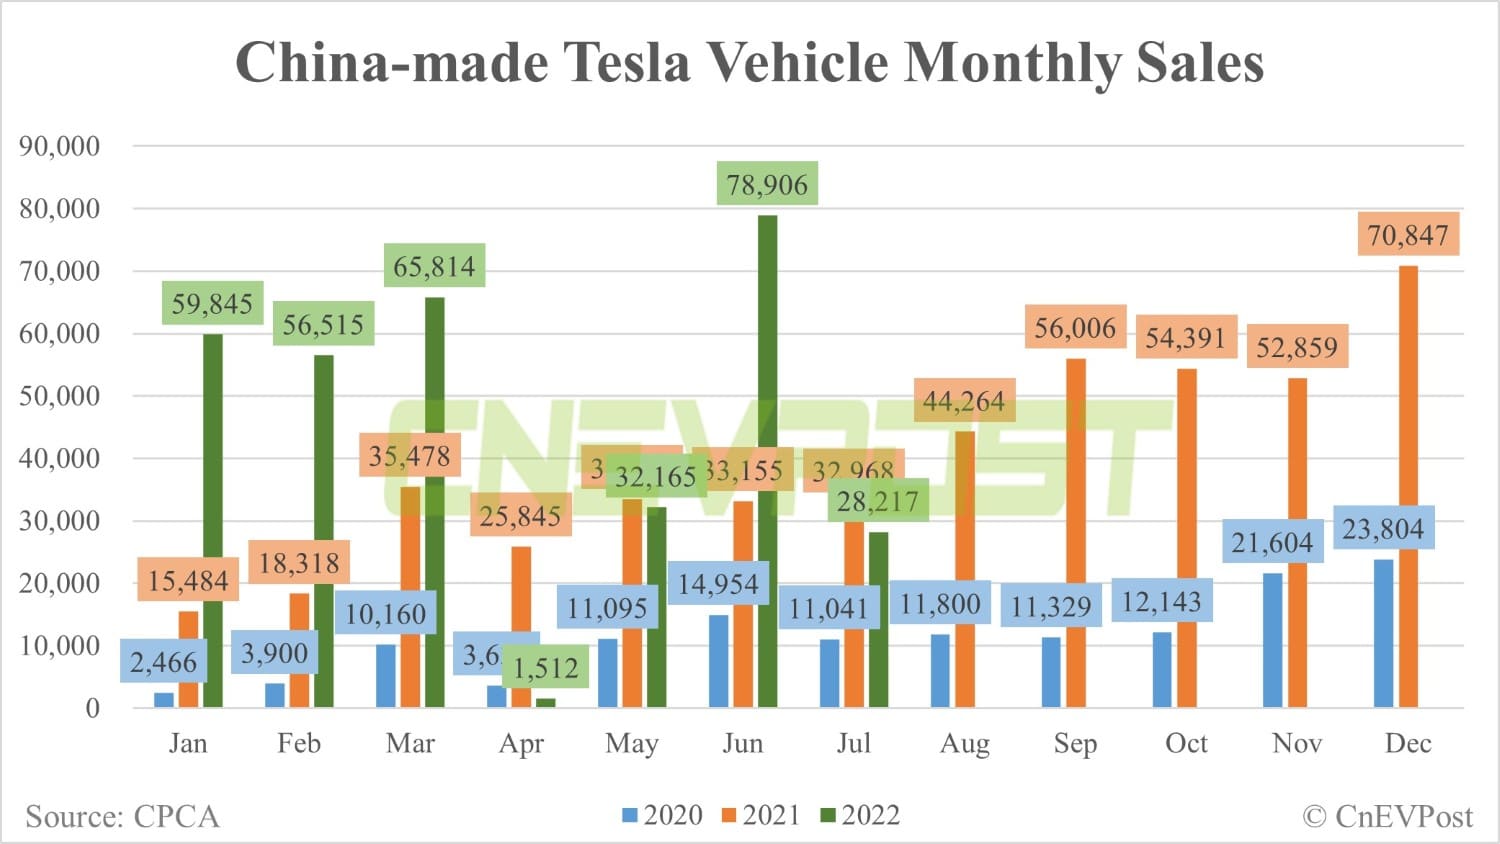 Tesla sells 28,217 China-made vehicles in July, down 64% from June-CnEVPost